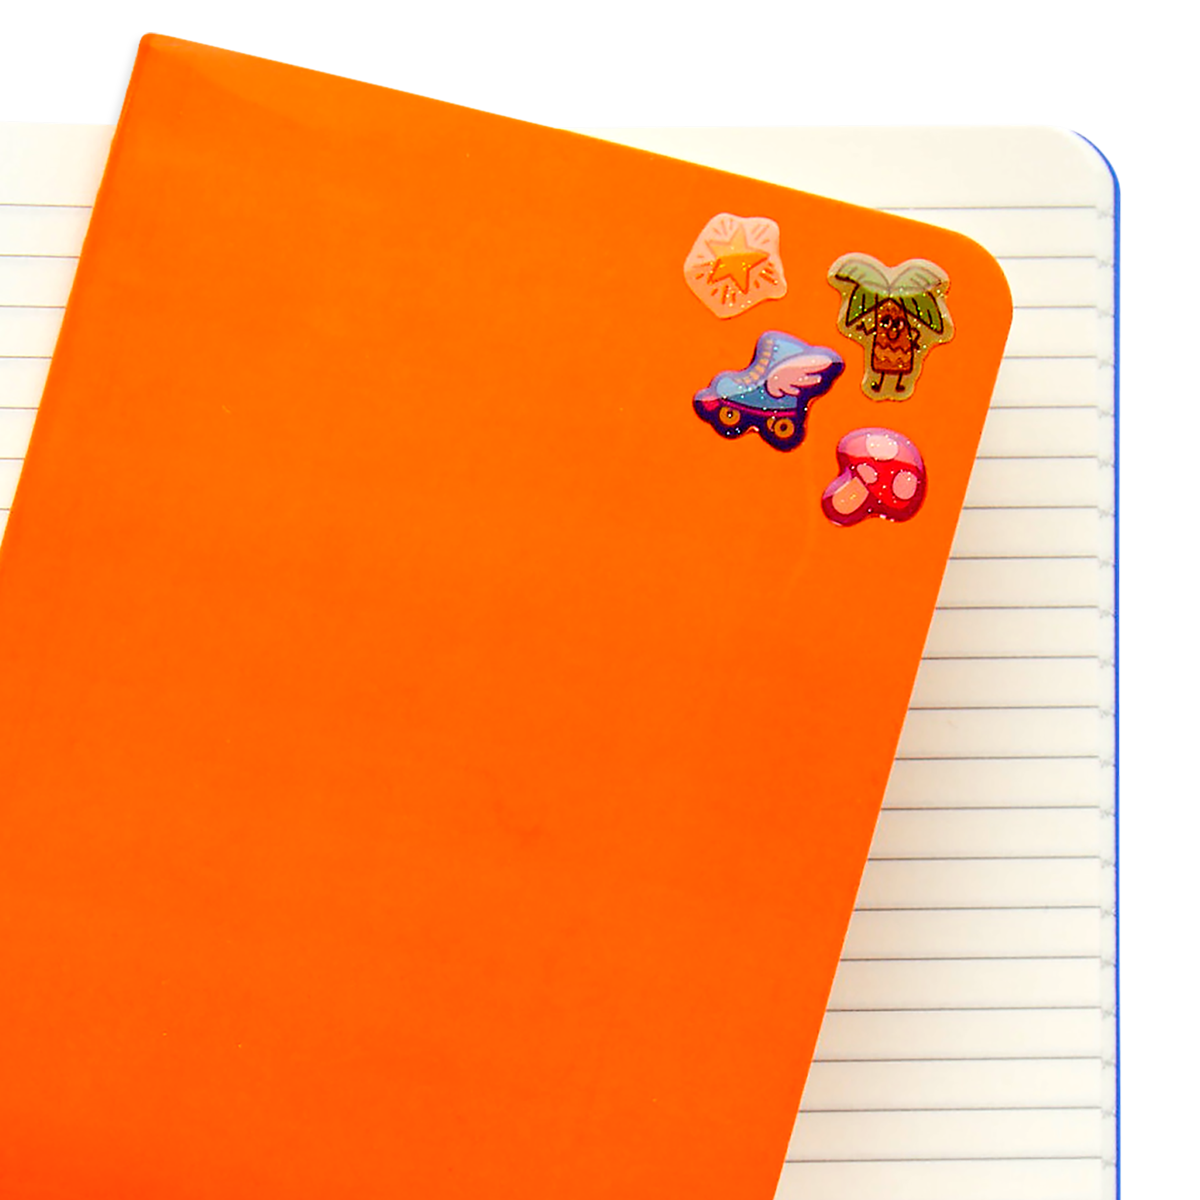 Stickiville Silly Doodles stickers on orange notepad